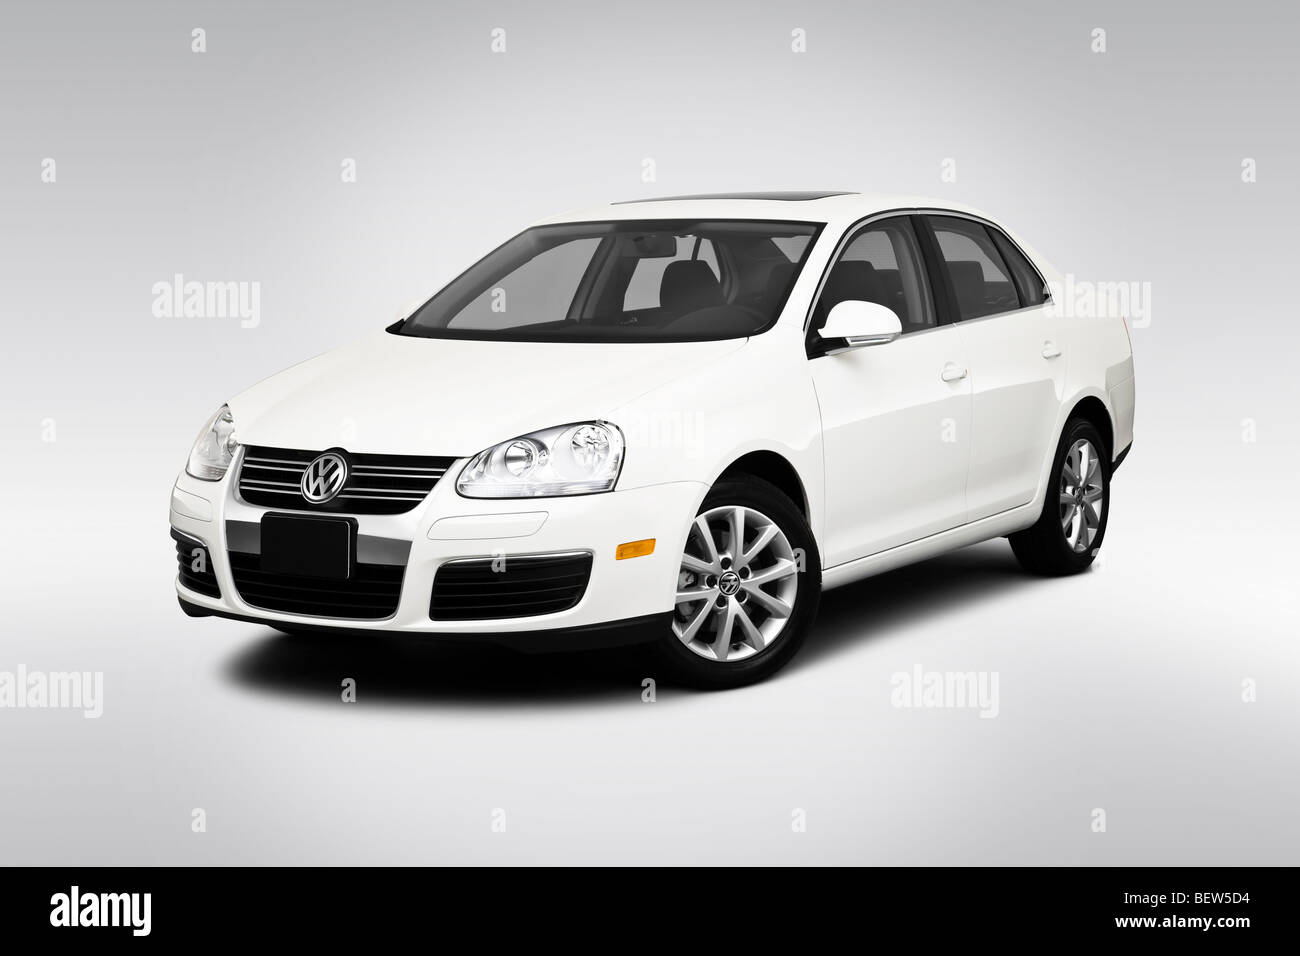 2010 Volkswagen Jetta SE in White - Front angle view Stock Photo - Alamy